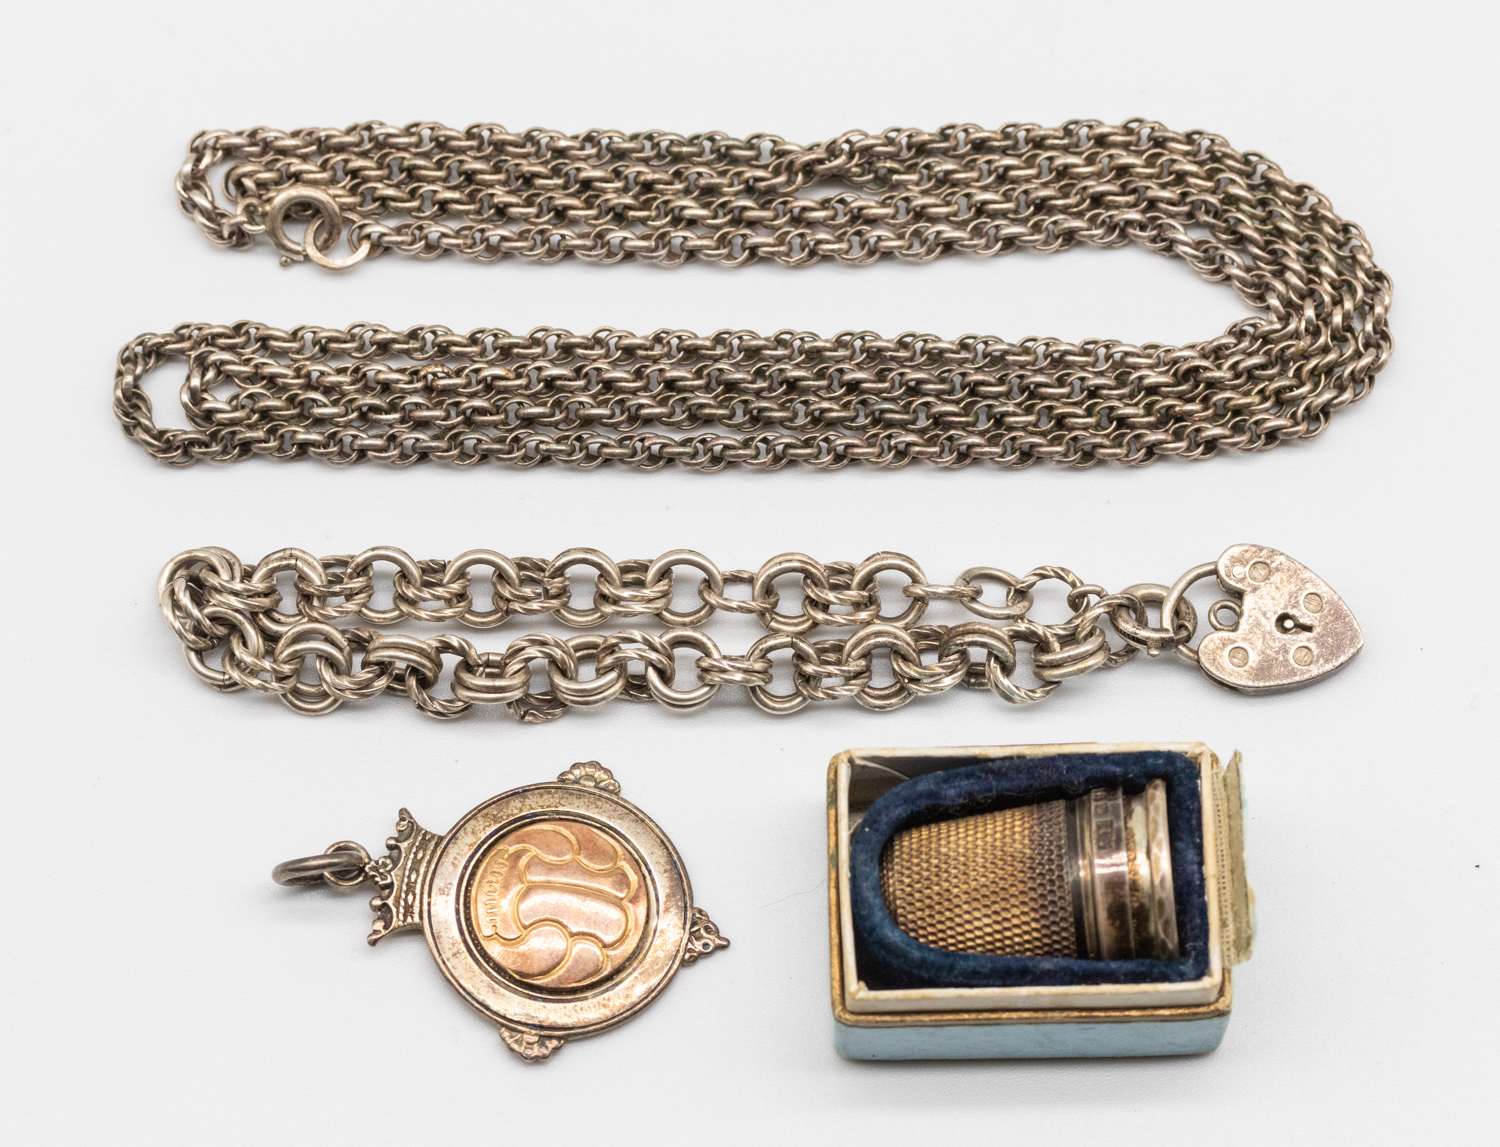 Selection of Silver Items.  To include a "835" stamped Silver Chain, a Sterling Silver Bracelet with